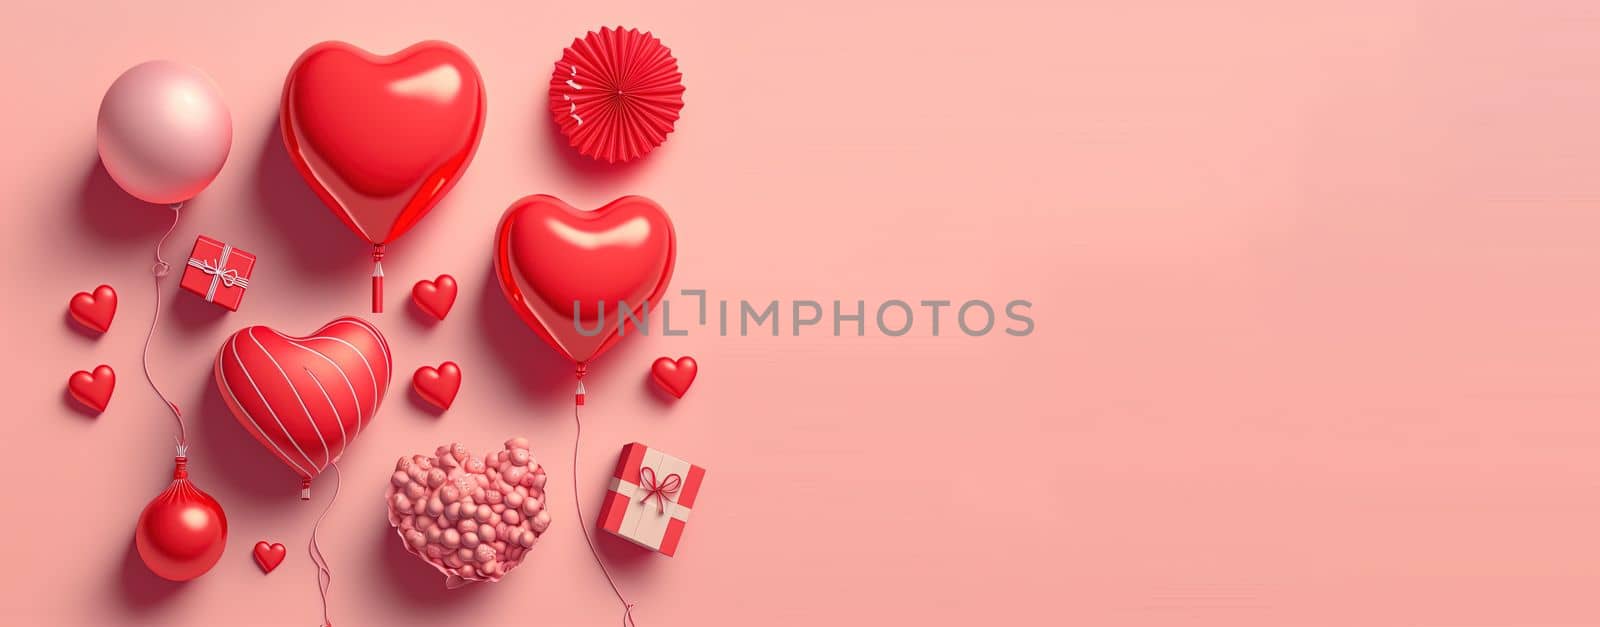 Valentine's day background and shiny 3d heart shape with small ornament for banner